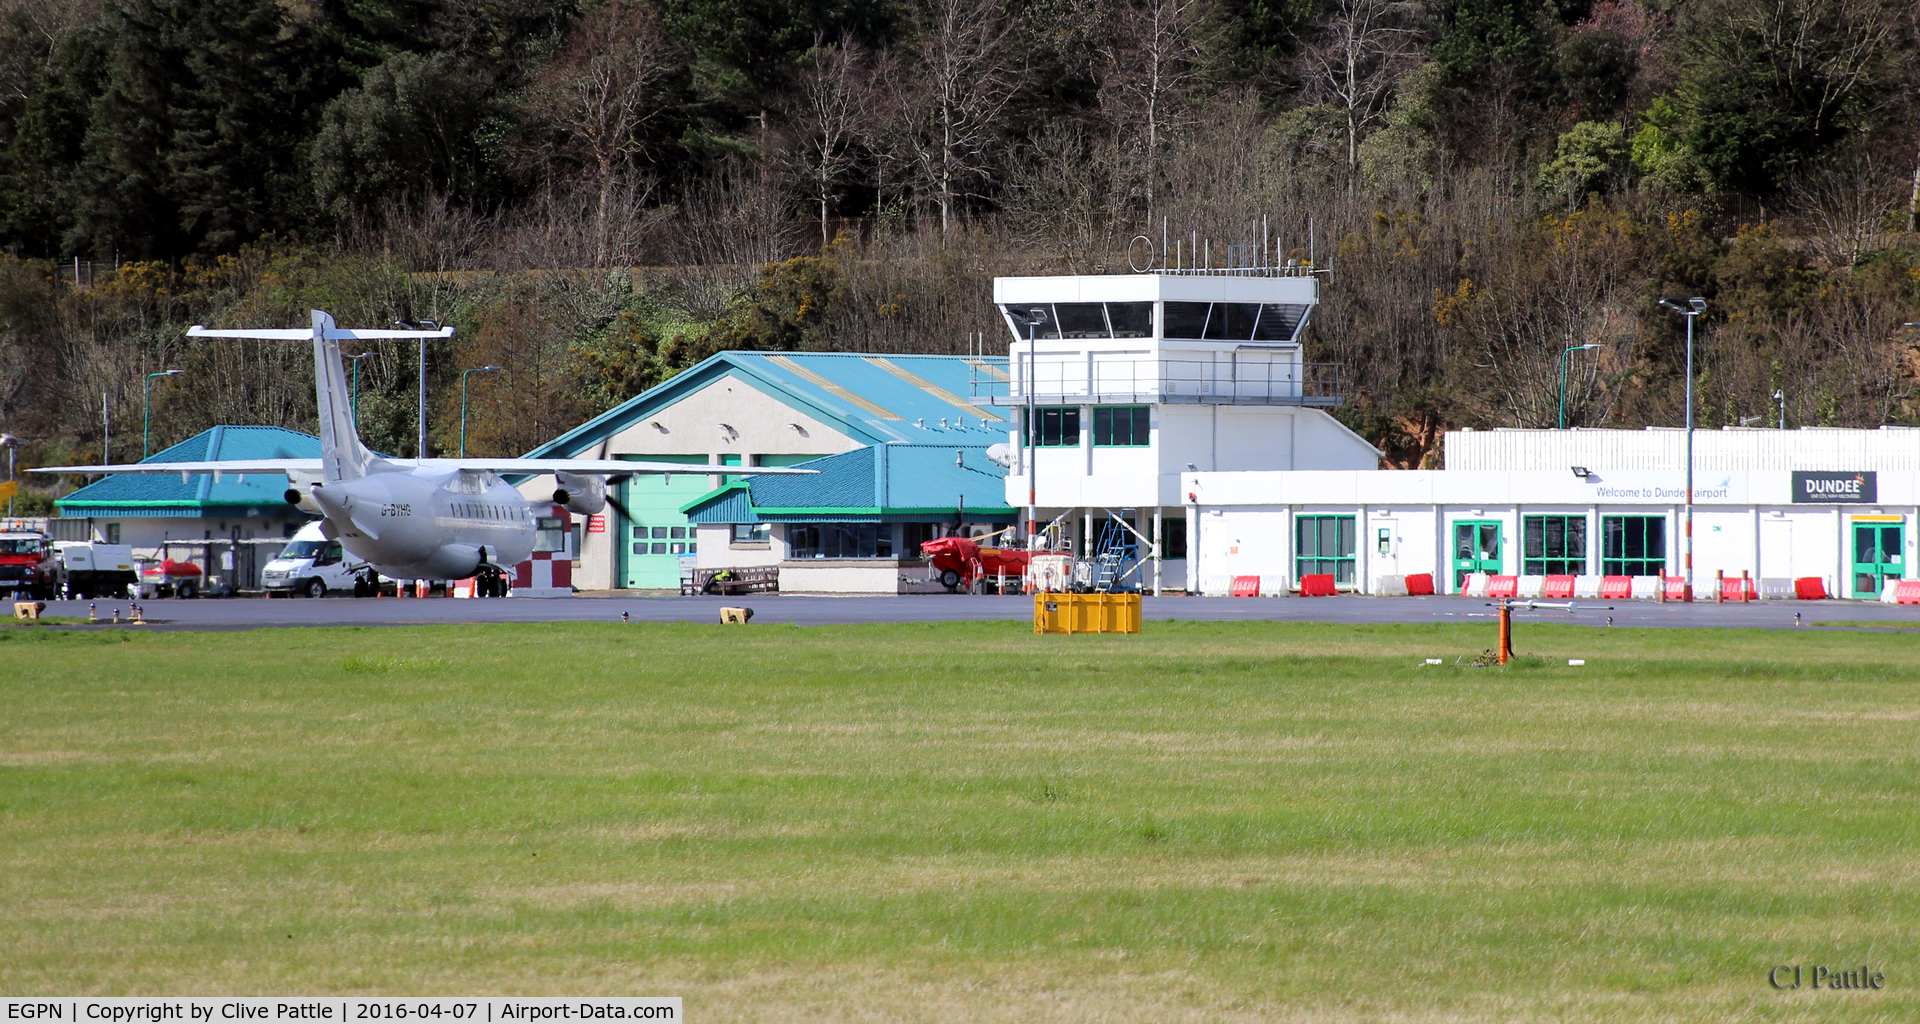 Dundee Airport, Dundee, Scotland United Kingdom (EGPN) - Dundee Riverside EGPN/DND - Tower